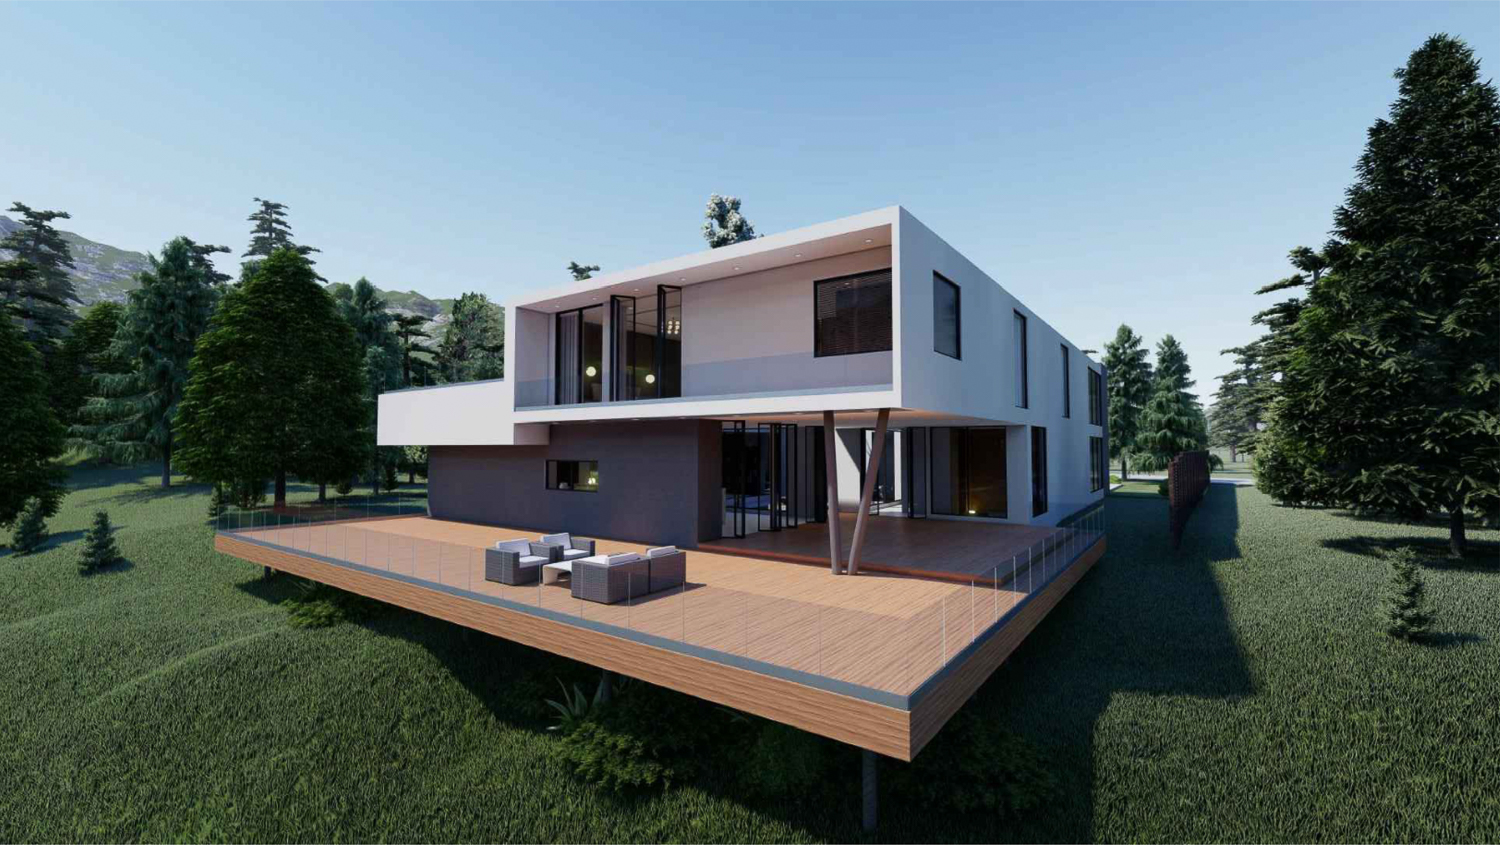 13193 Skyline Boulevard dynamic view of the deck and second-level terrace, rendering by Ben Tarcher Architects